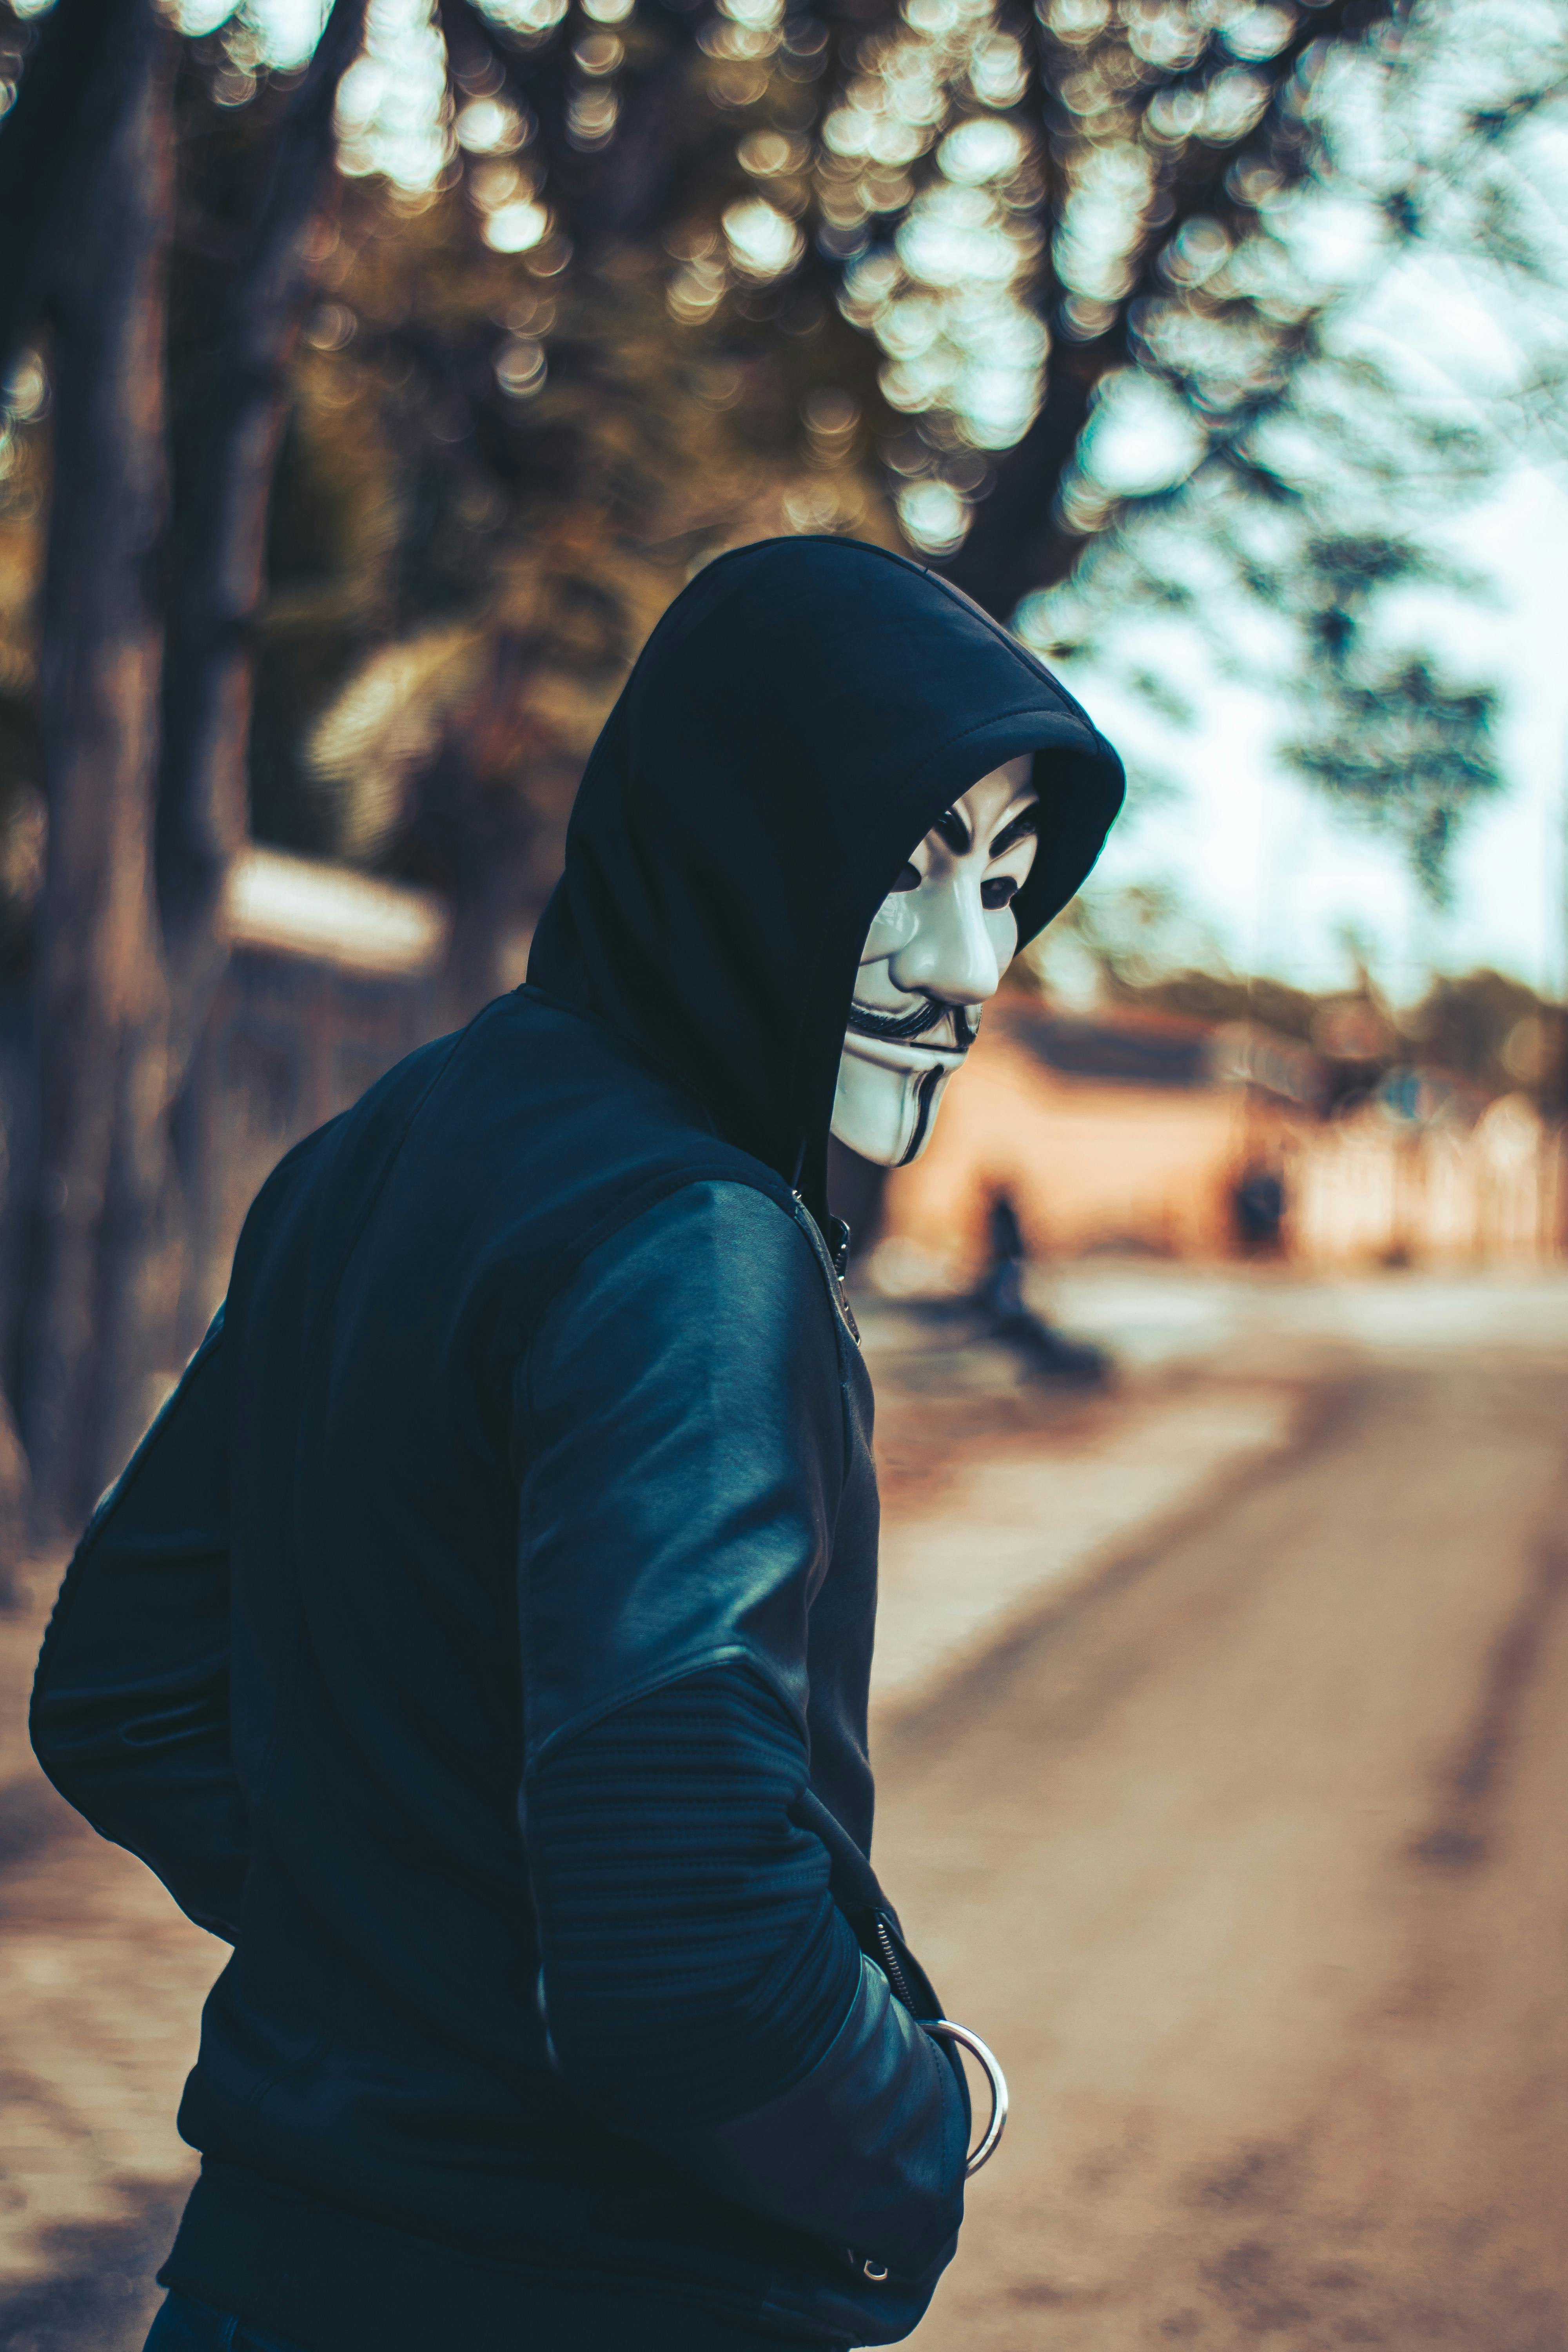 Wallpaper Hacked Mask, Hacker, Mask, Android, Guy Fawkes Mask, Background -  Download Free Image